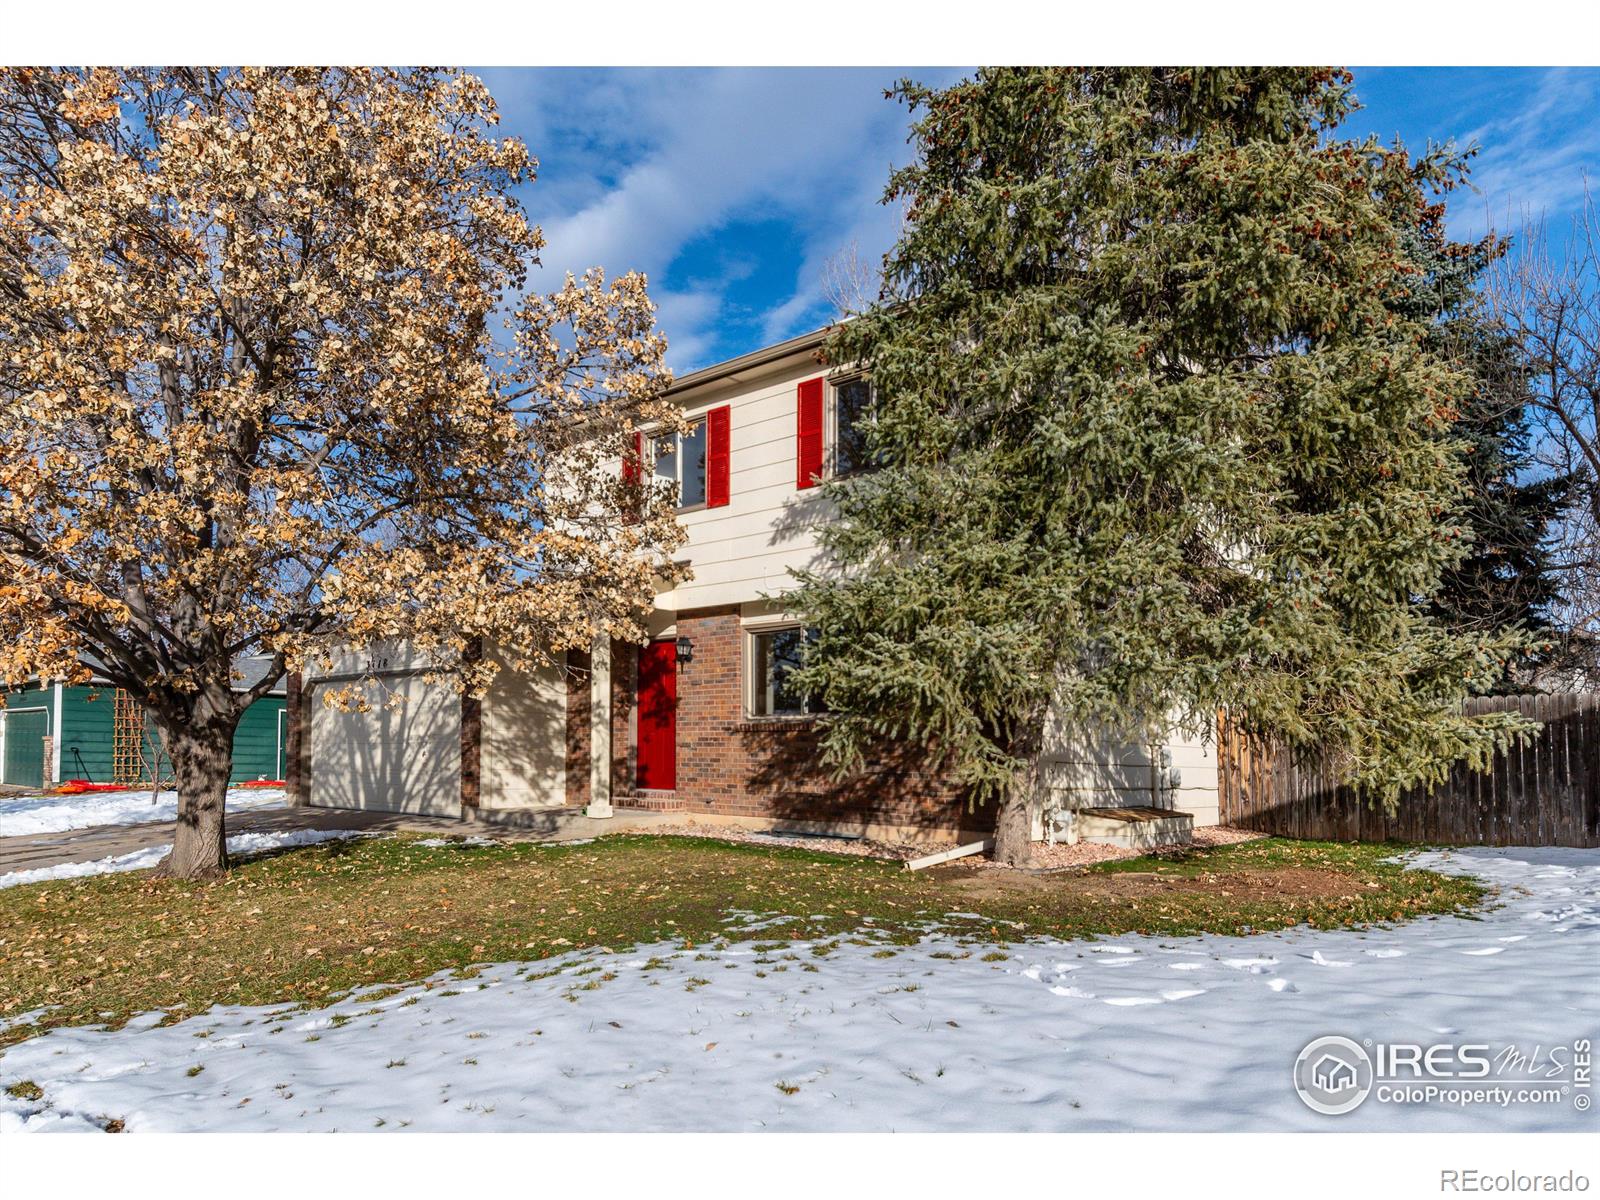 Report Image for 3118  Boone Street,Fort Collins, Colorado